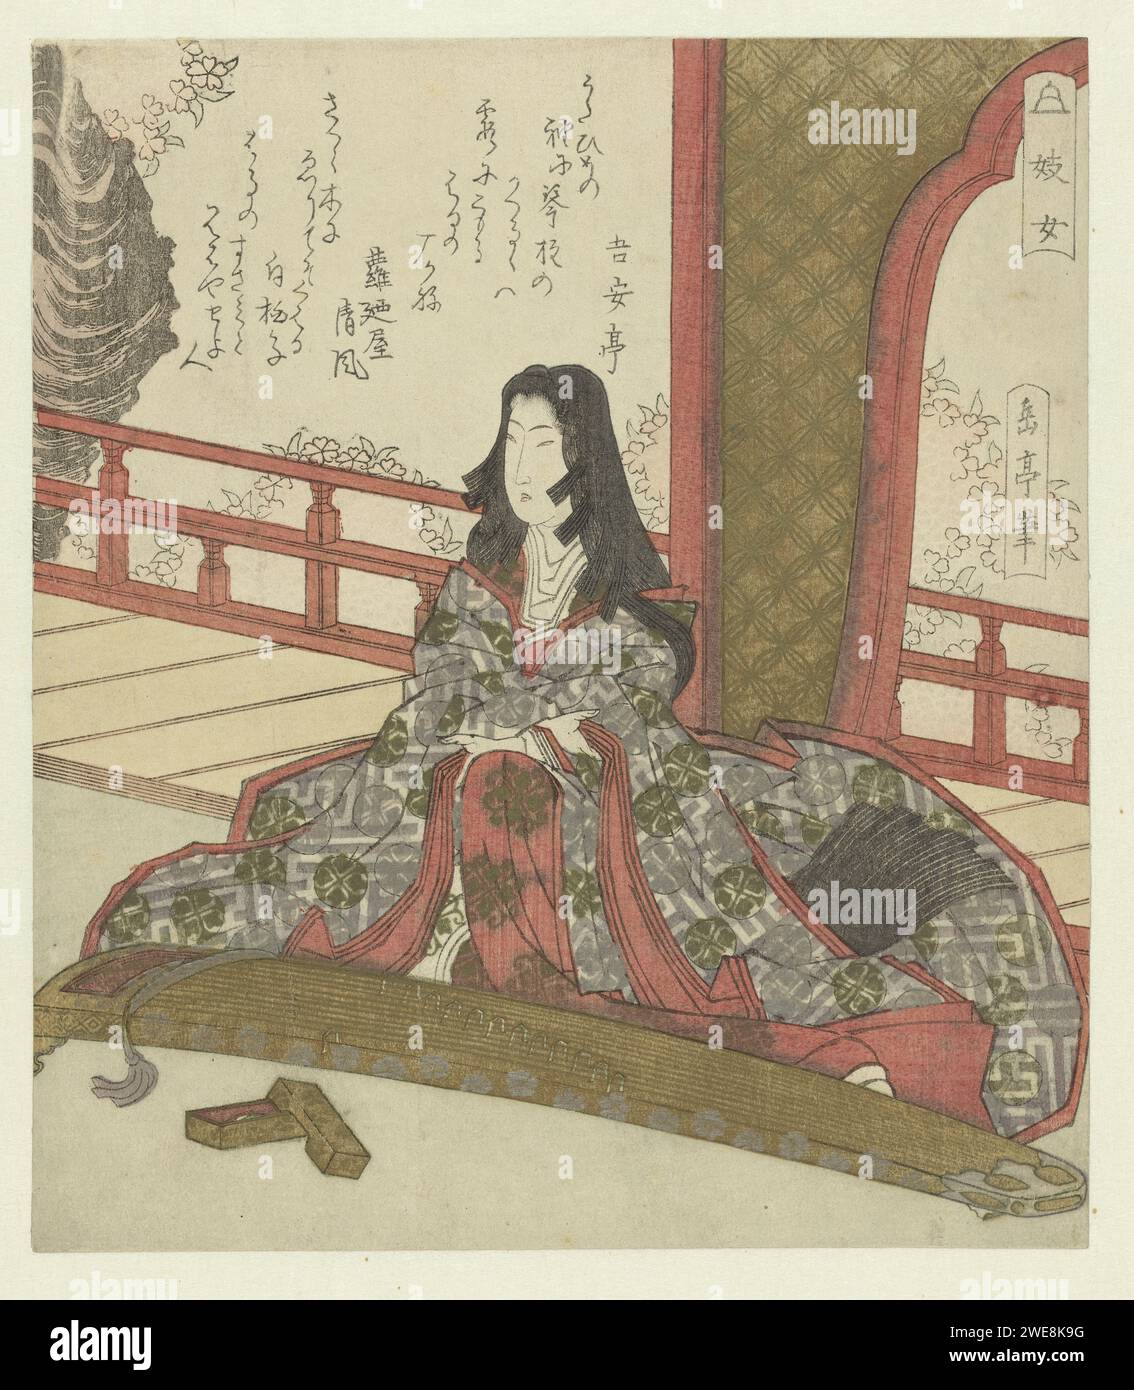 De Dame Ginjô, yashima gakutei, c. 1823  A woman with very long hair sits on a balcony, behind her koto (Japanese string instrument). She hits her long sleeves aside before she starts playing the instrument. Ginjô, or Gijô, is the younger sister of Giô, both figures appear in the stories of Heike (Heike Monogatari). Ginjô was the mistress of Taira No Kiyomori. This leaf is the right leaf of a triptych. With two poems. Japan paper color woodcut dignitary at court - BB - female dignitary: lady-in-waiting Stock Photo